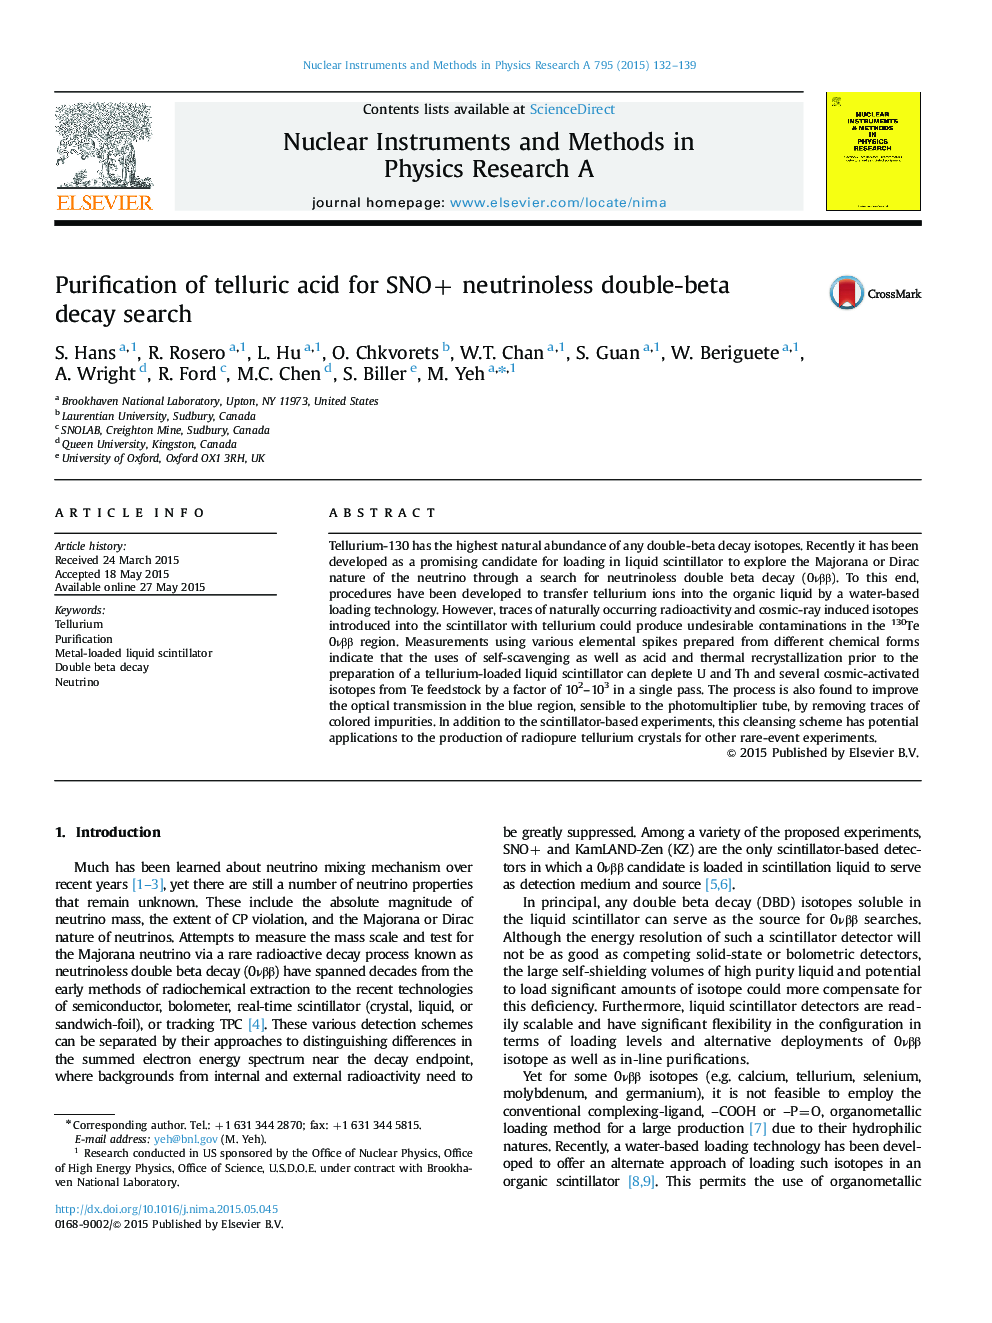 Purification of telluric acid for SNO+ neutrinoless double-beta decay search